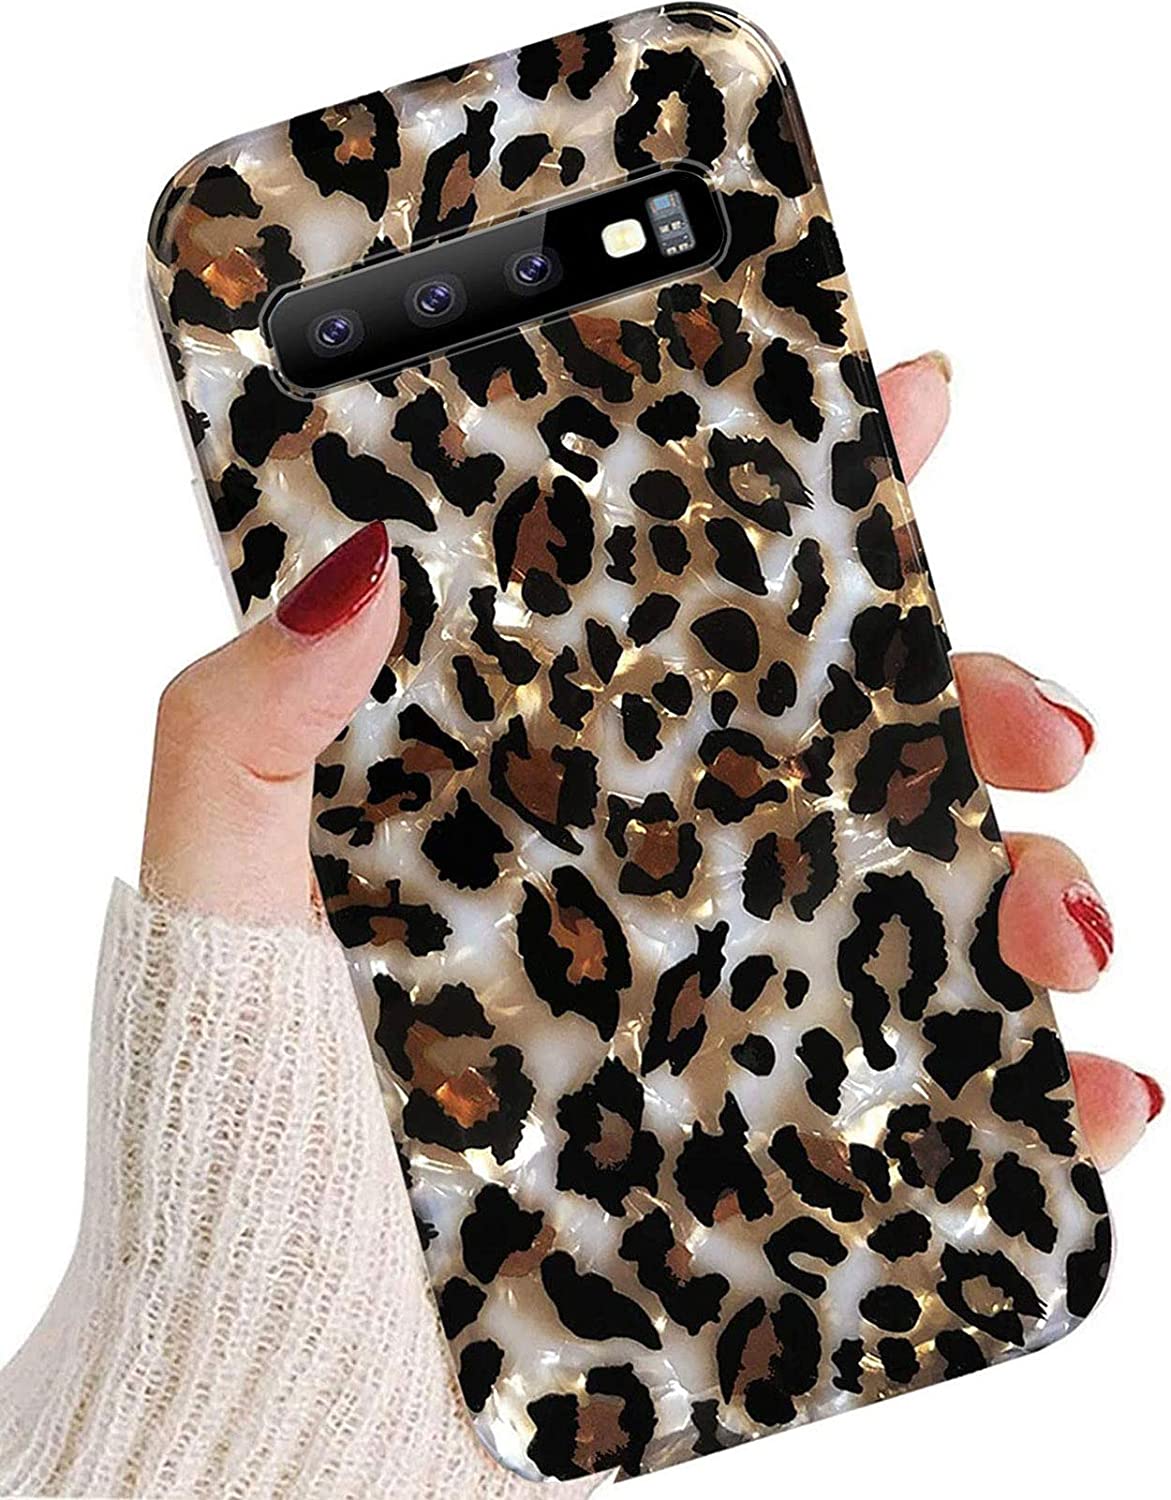 J.west Leopard Case for Galaxy S10 Plus Case 6.4 inch, Luxury Sparkle Cheetah Print Girls Women Pretty Design Ultra Slim Soft Silicone Protective Phone Case Cover for Samsung Galaxy S10 Plus